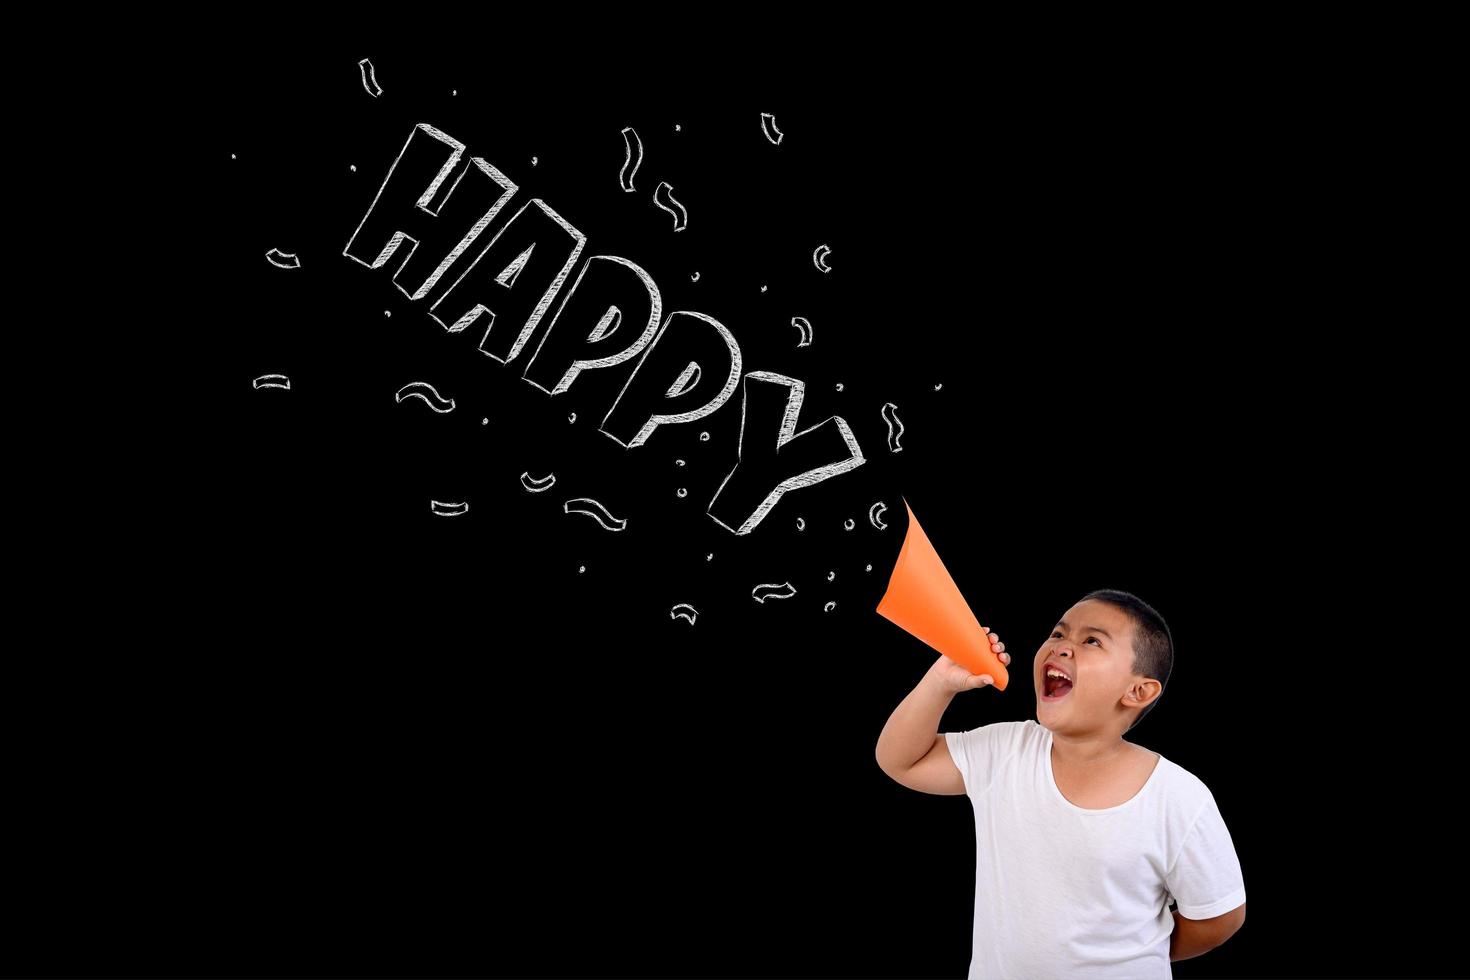 The boy shouted loudly the word HAPPY written on chalkboard photo